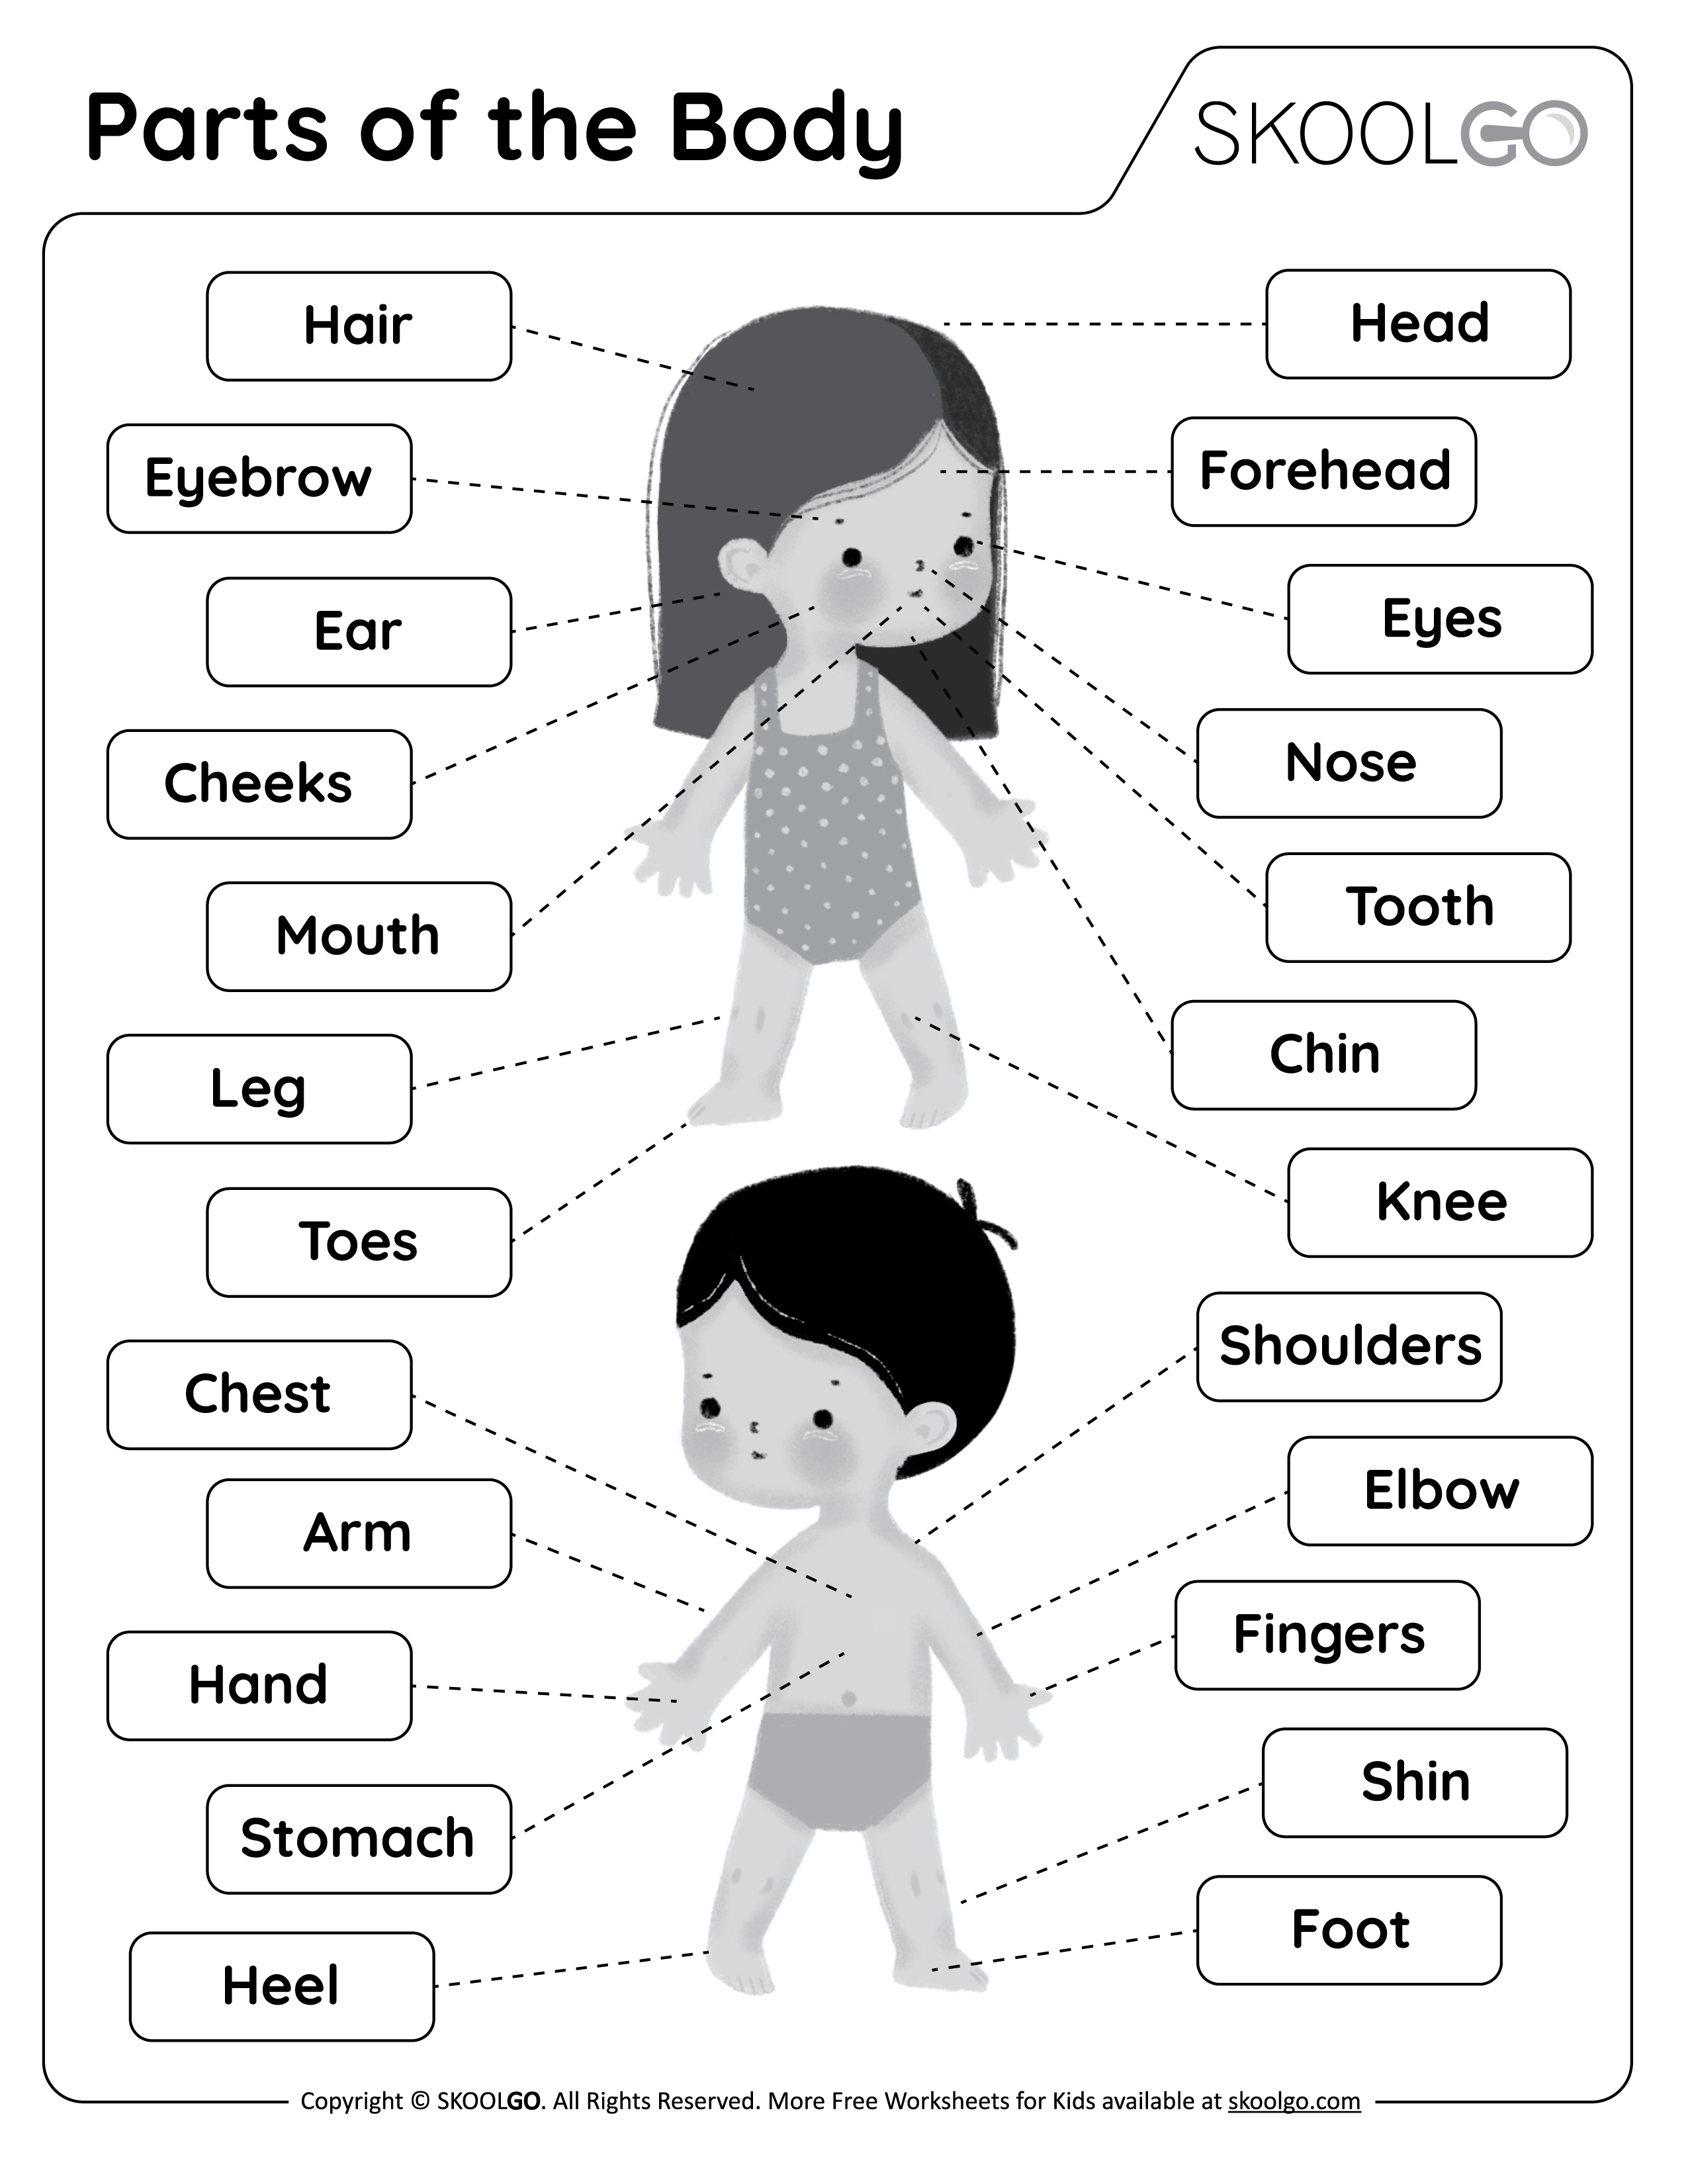 Parts of the Body - Free Black and White Worksheet for Kids